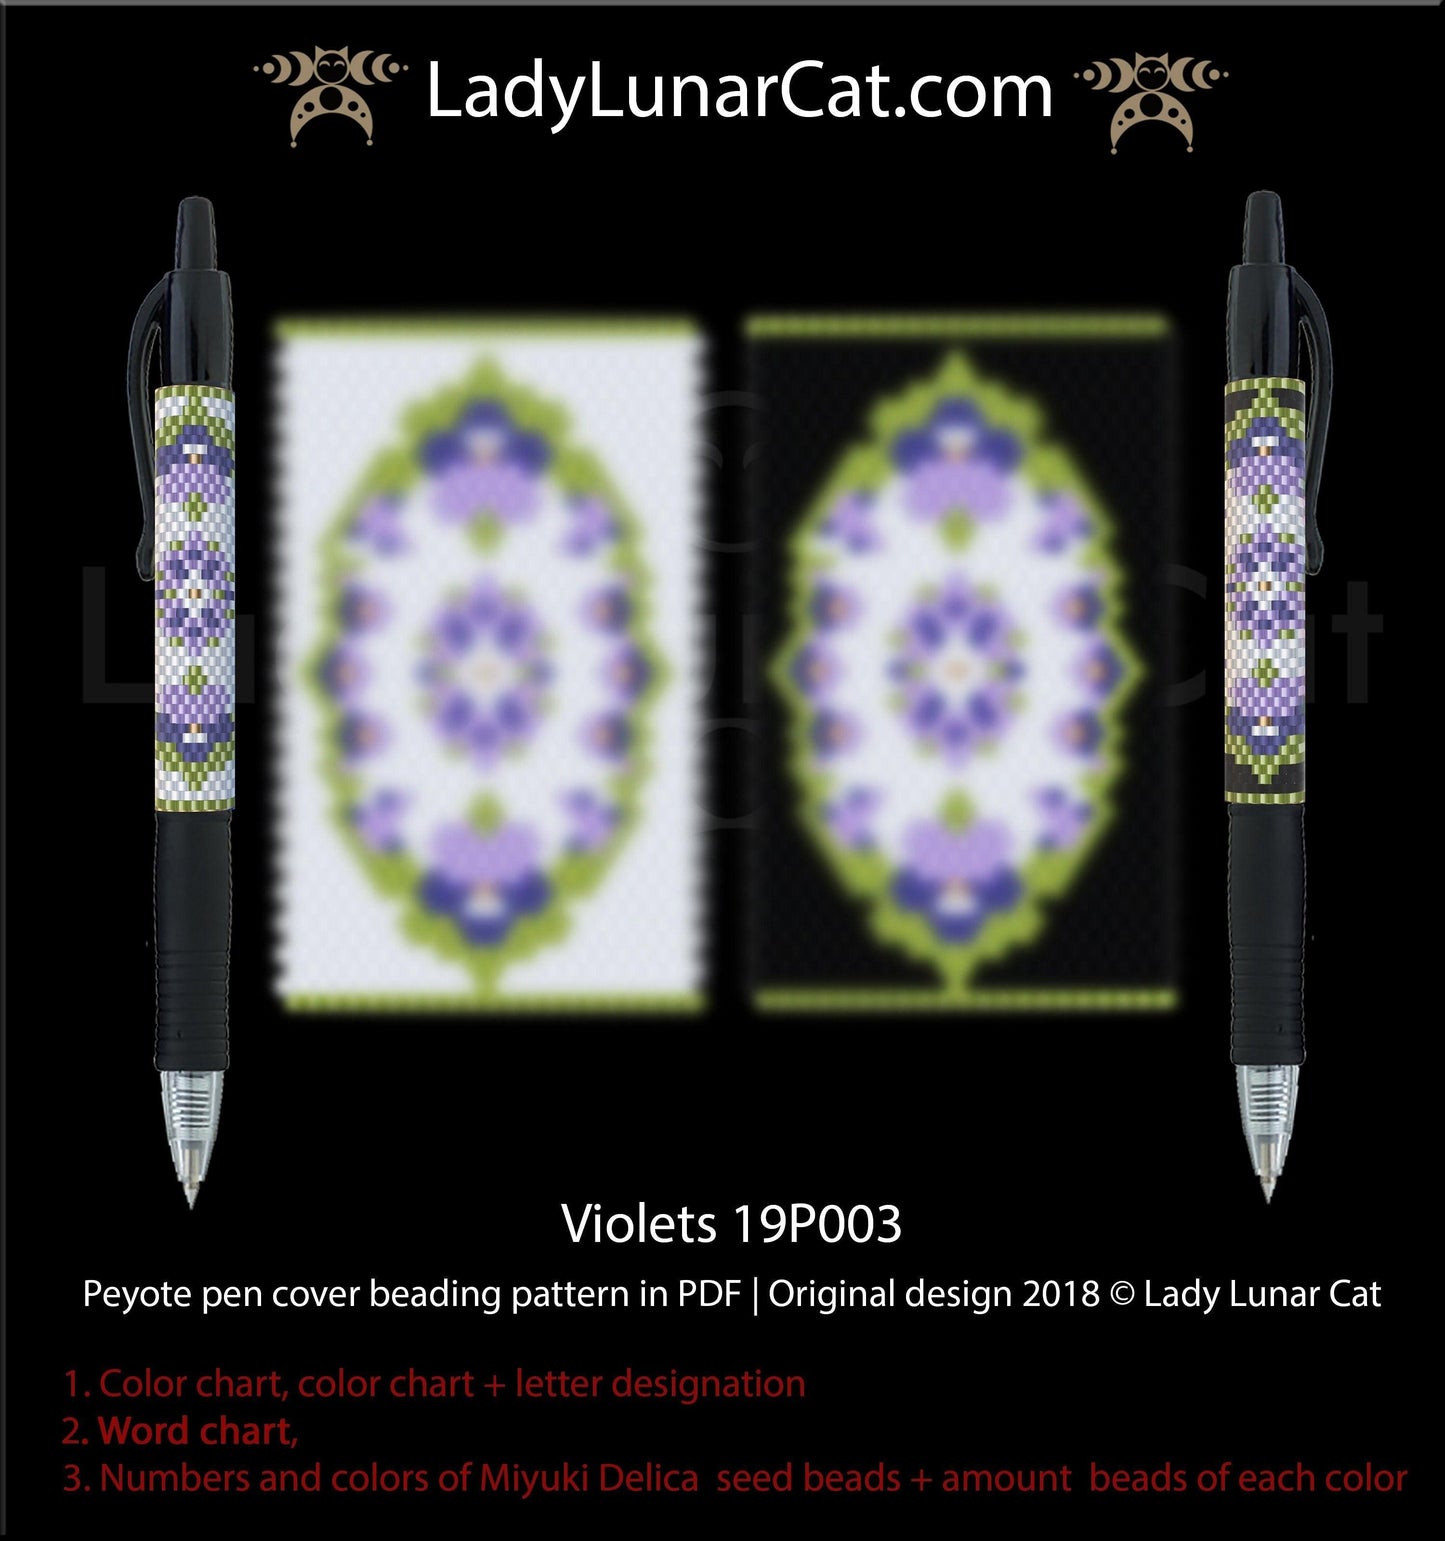 Copy of Peyote pen cover pattern for beading | Beaded pen wrap  tutorial Clover and horseshoes 18P004 LadyLunarCat